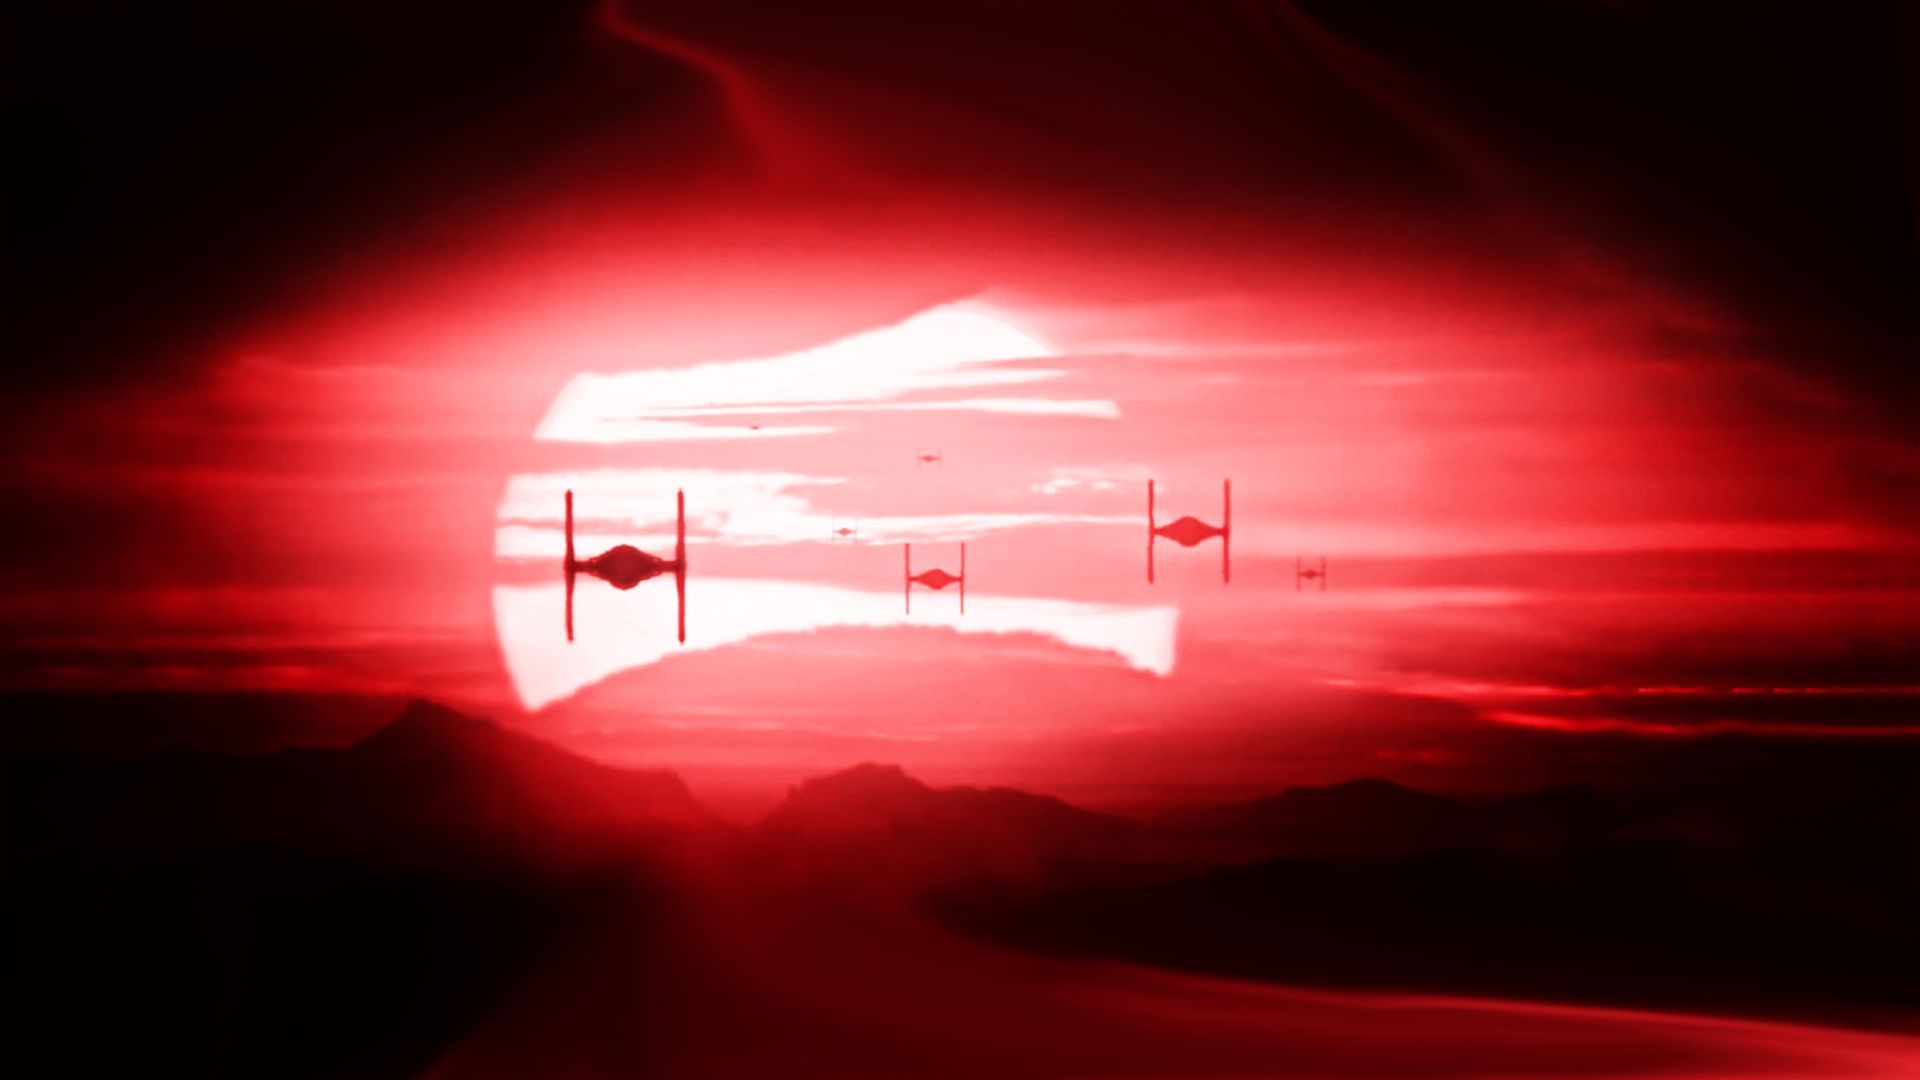 Star Wars The Force Awakens TIE Fighters Background